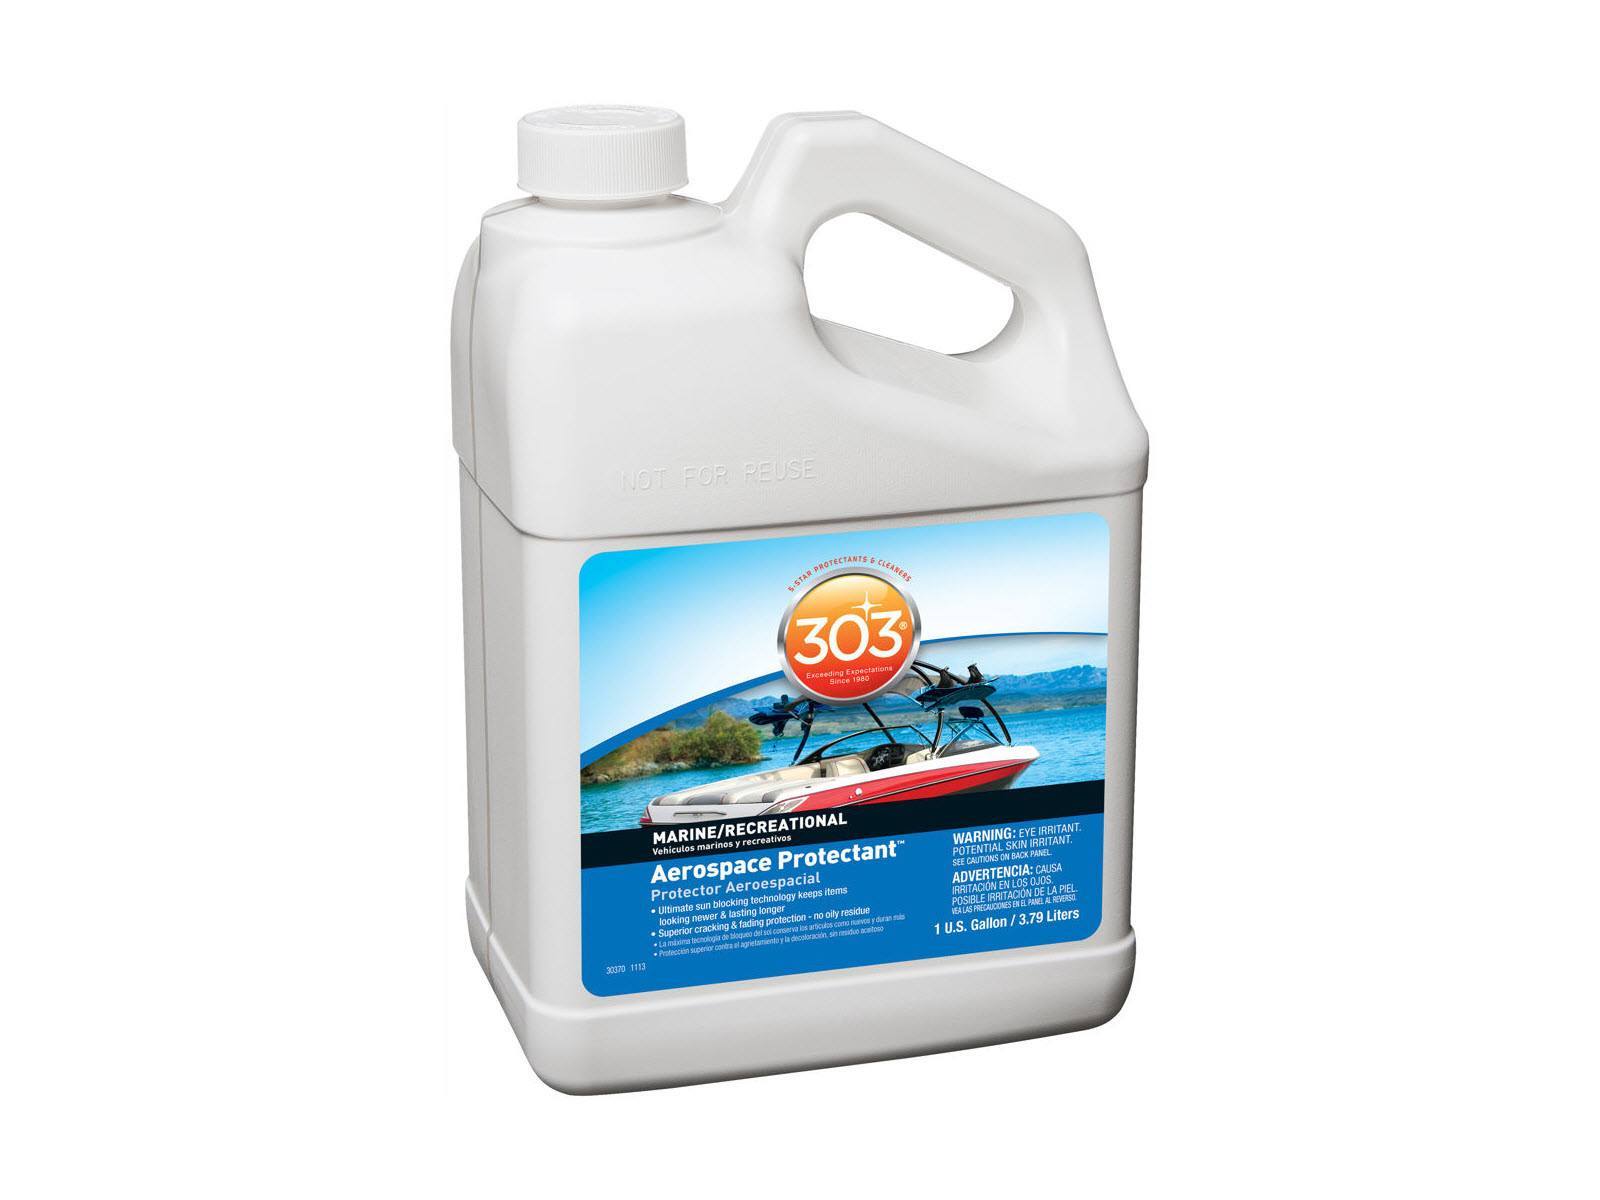 1 gallon 303 Aerospace Protectant and Lubricant